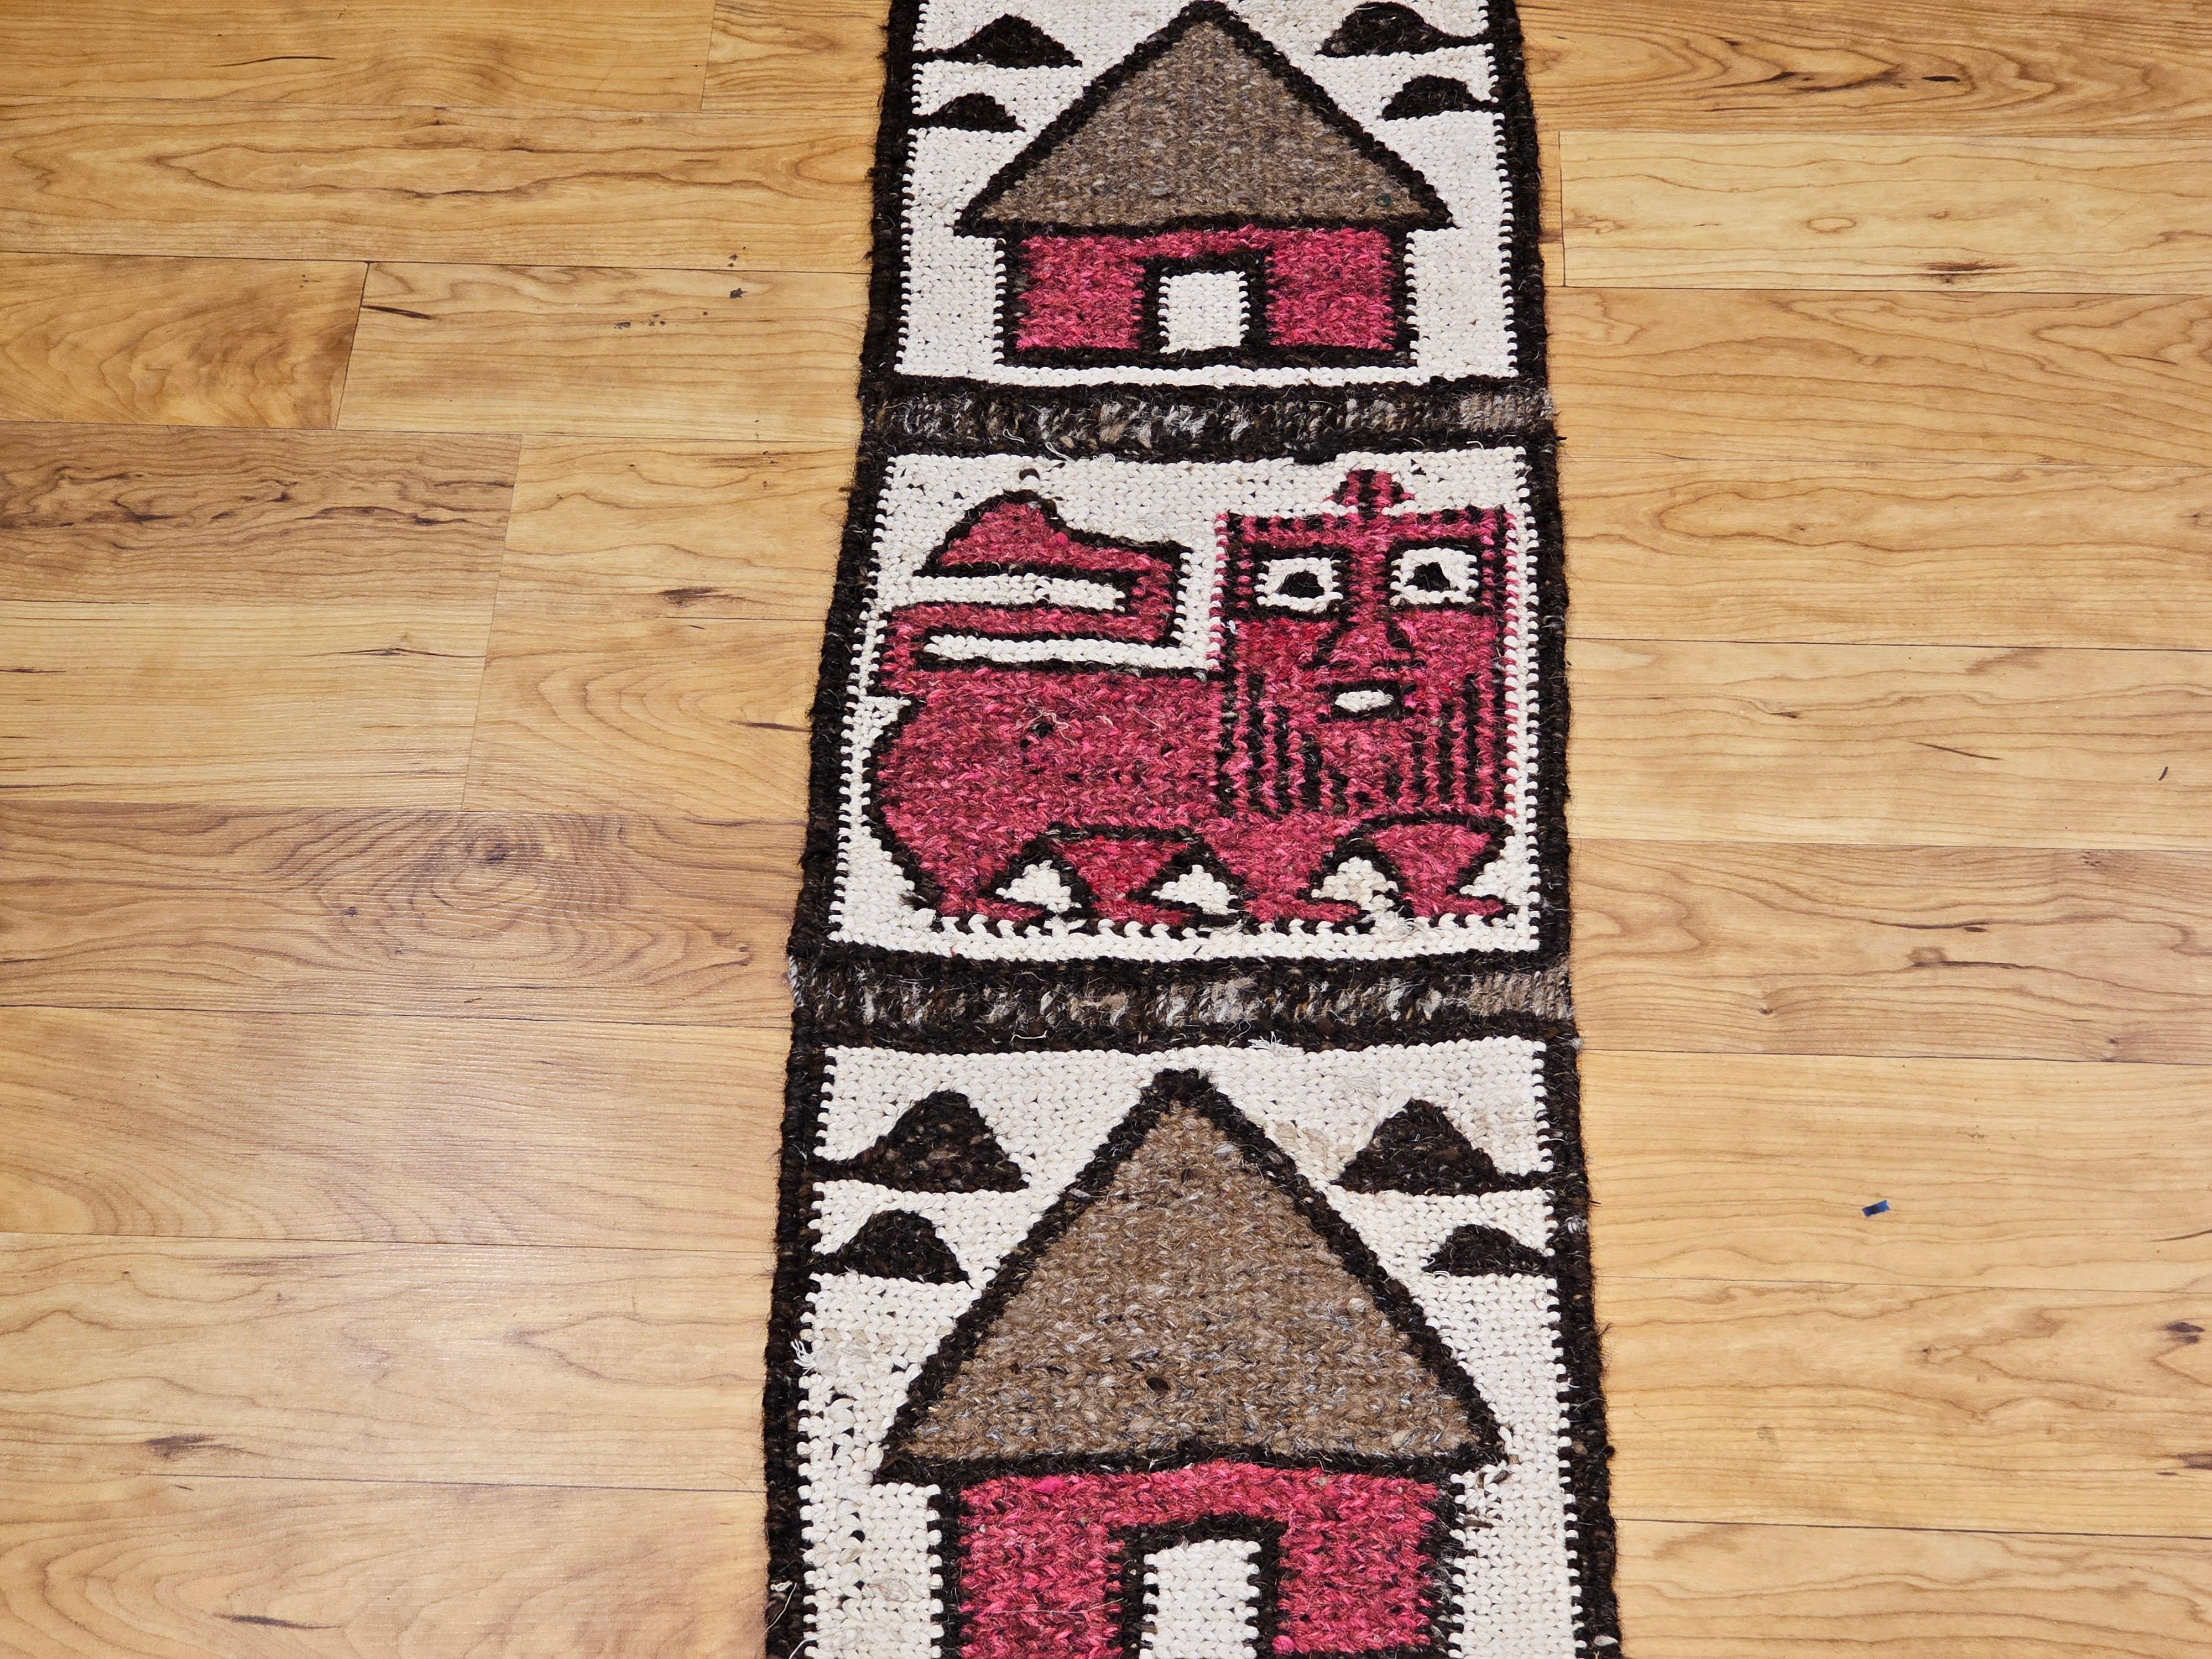 Hand-Crafted Vintage African Woven Table Runner or Wall Art in Cream, Red, Black, Brown For Sale